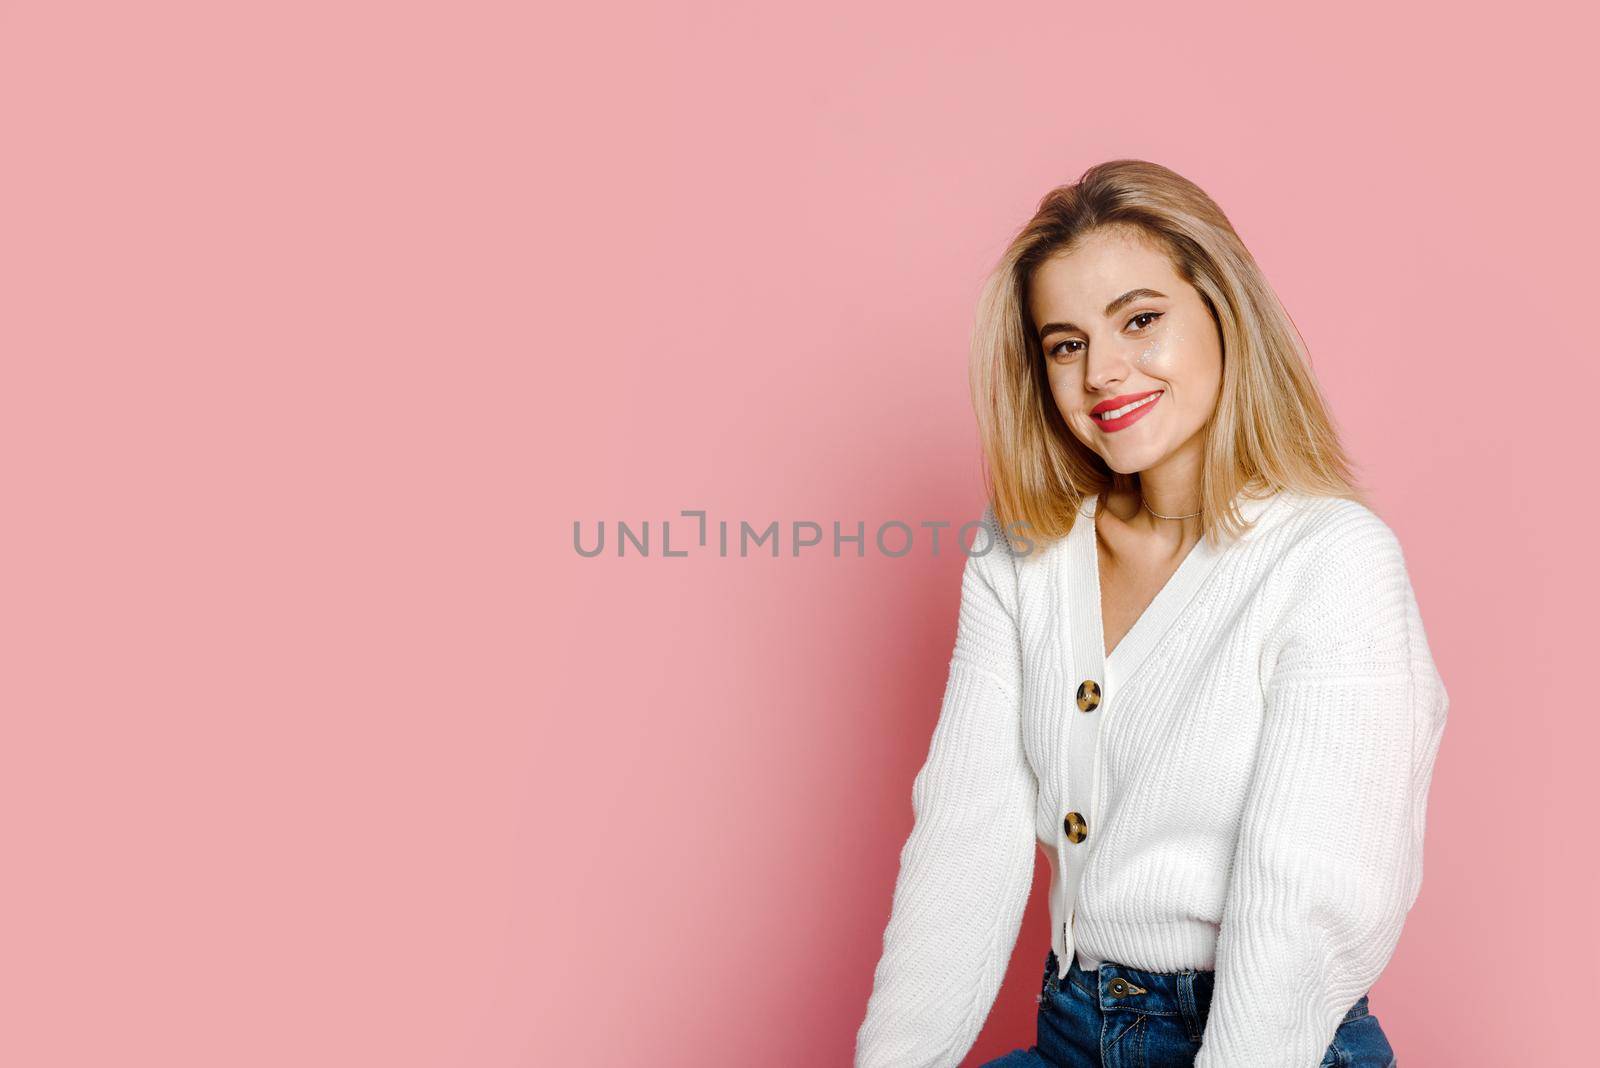 A cute fashion model in a white sweater smiles and looks at the camera against a pink background. Tenderness and youth.